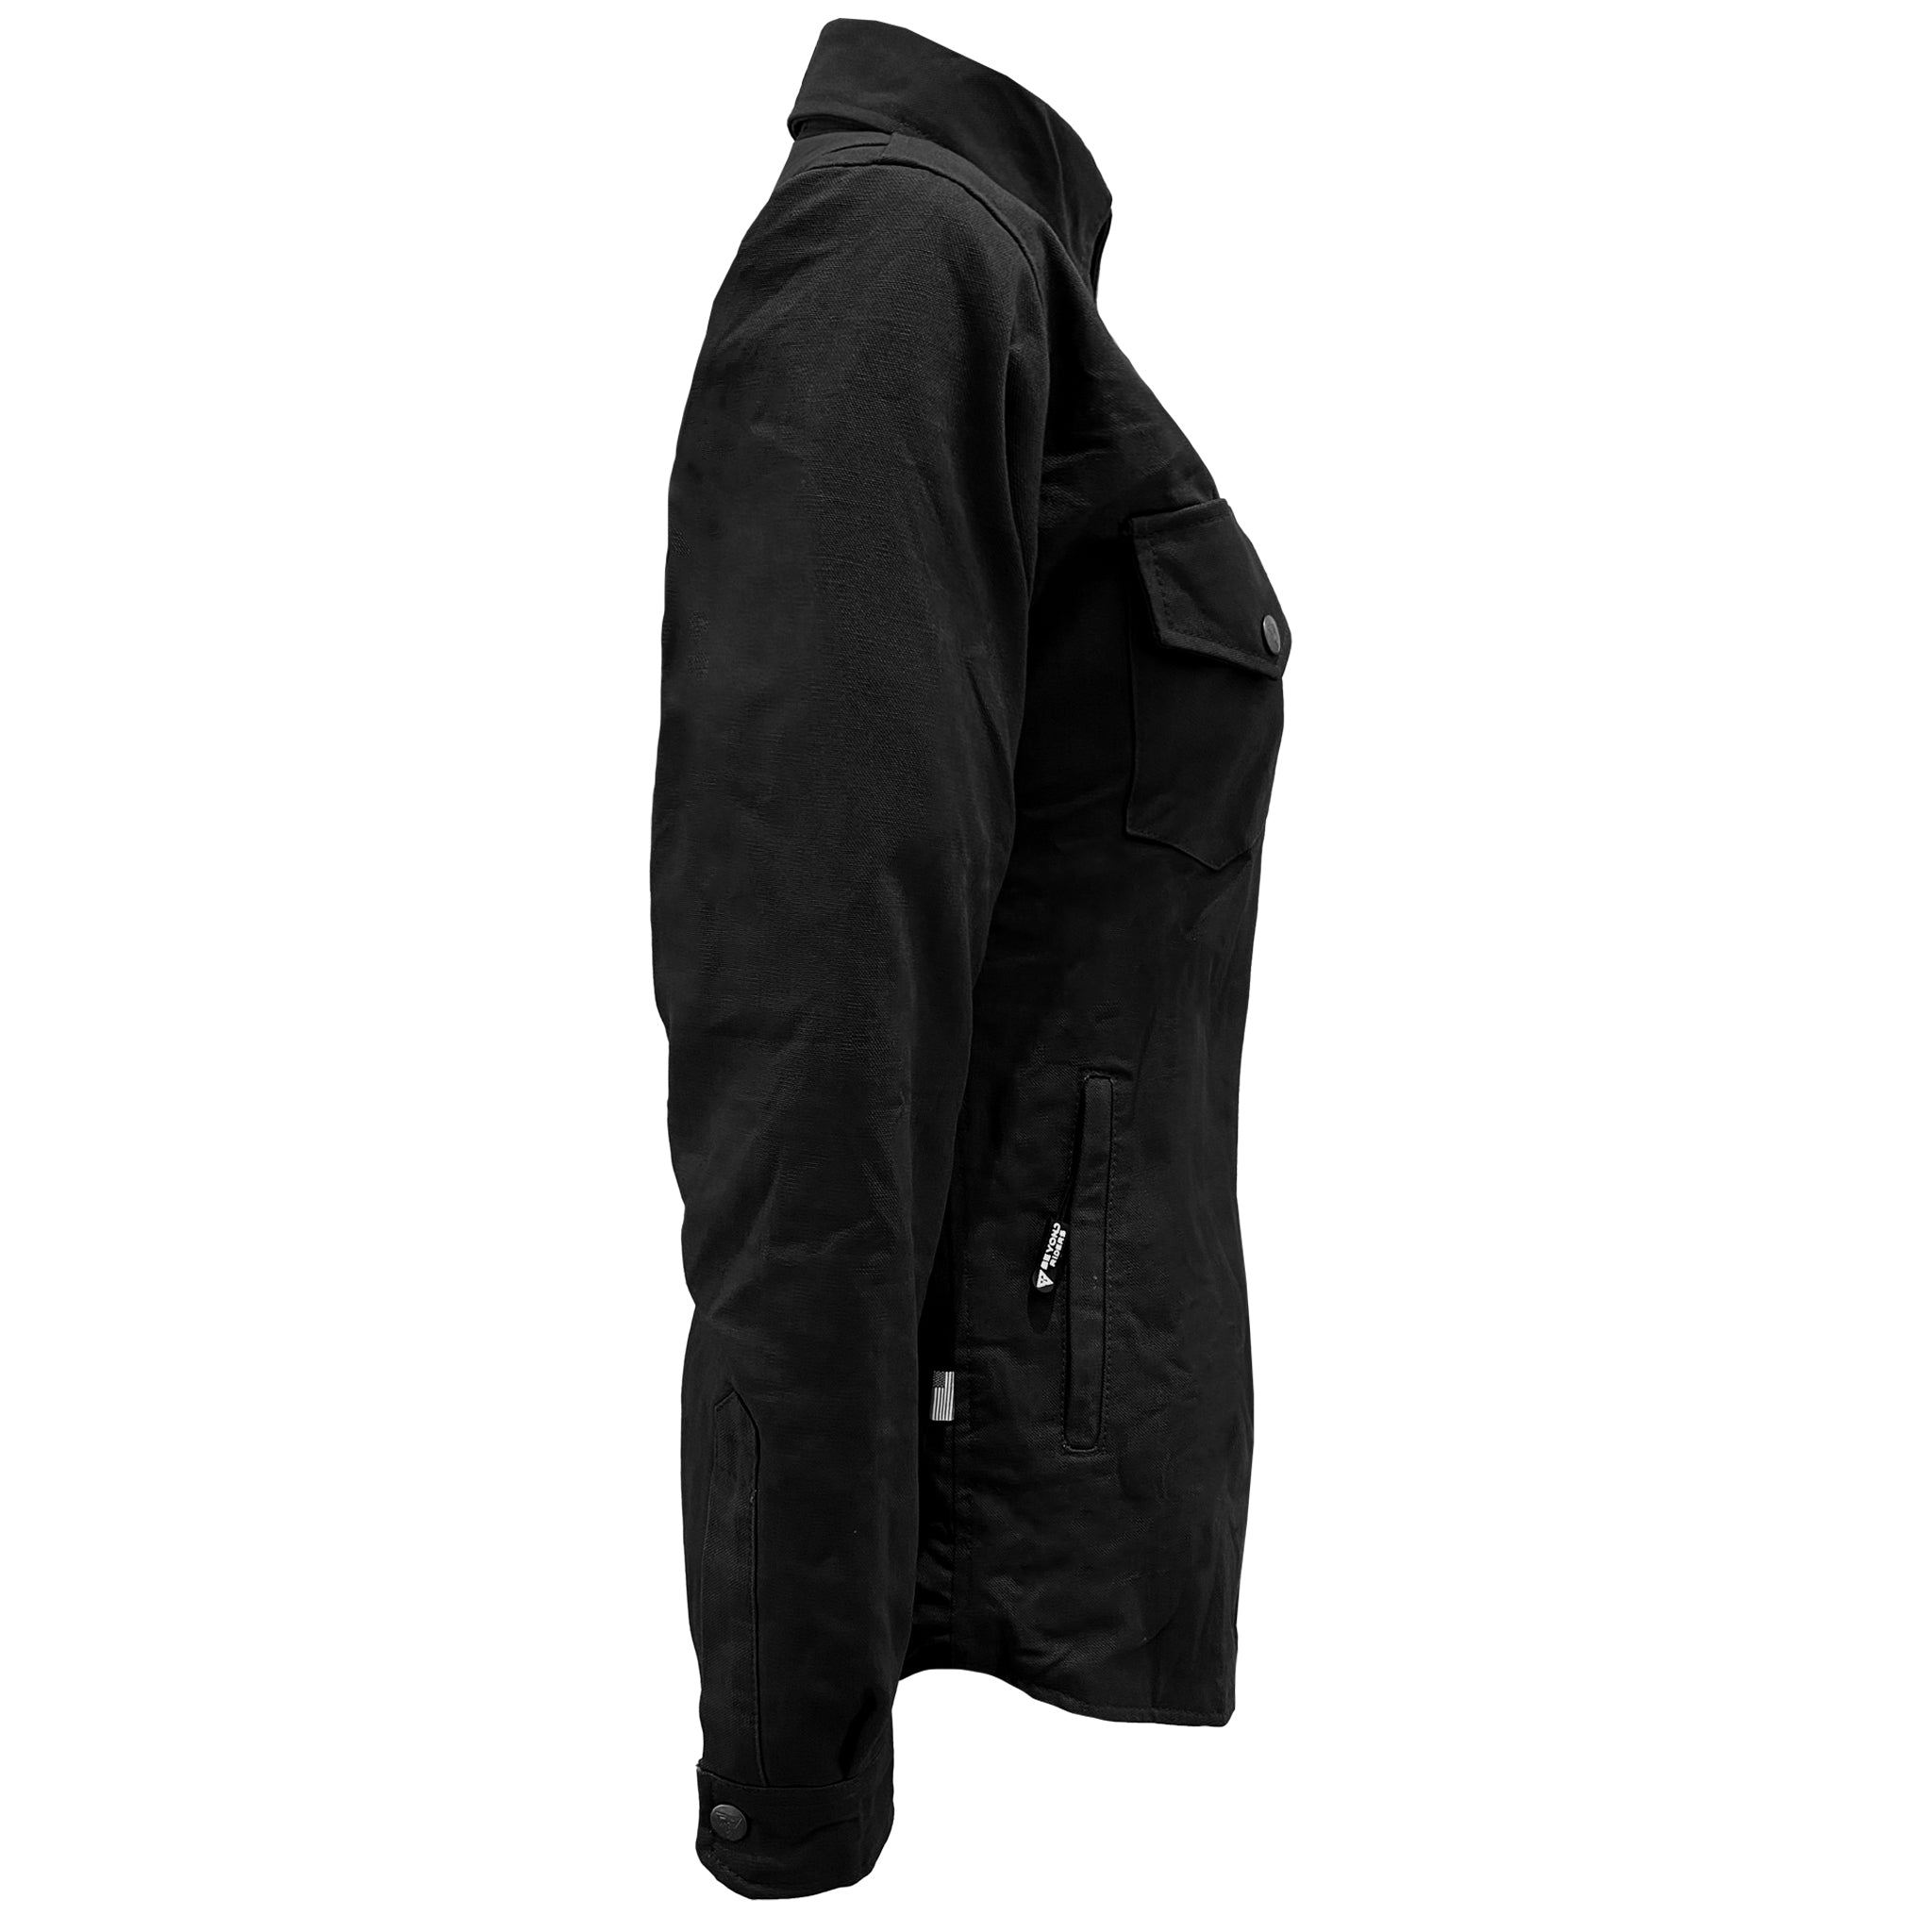 Protective Canvas Jacket for Women - Black